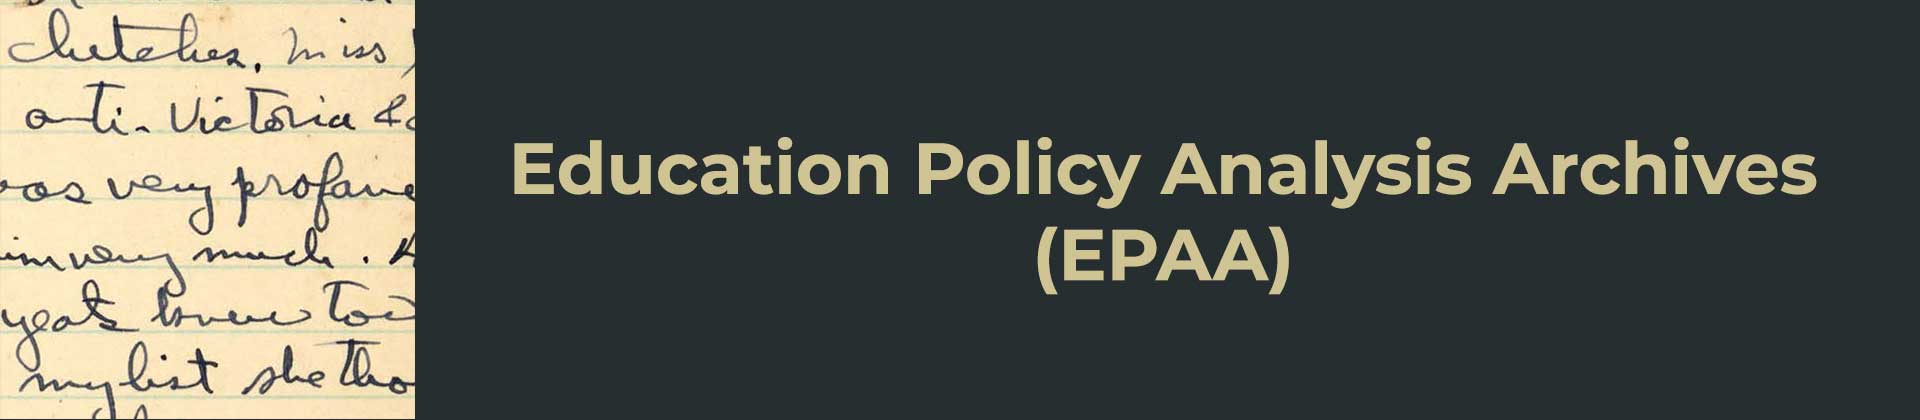 Education Policy Analysis Archives (EPAA)